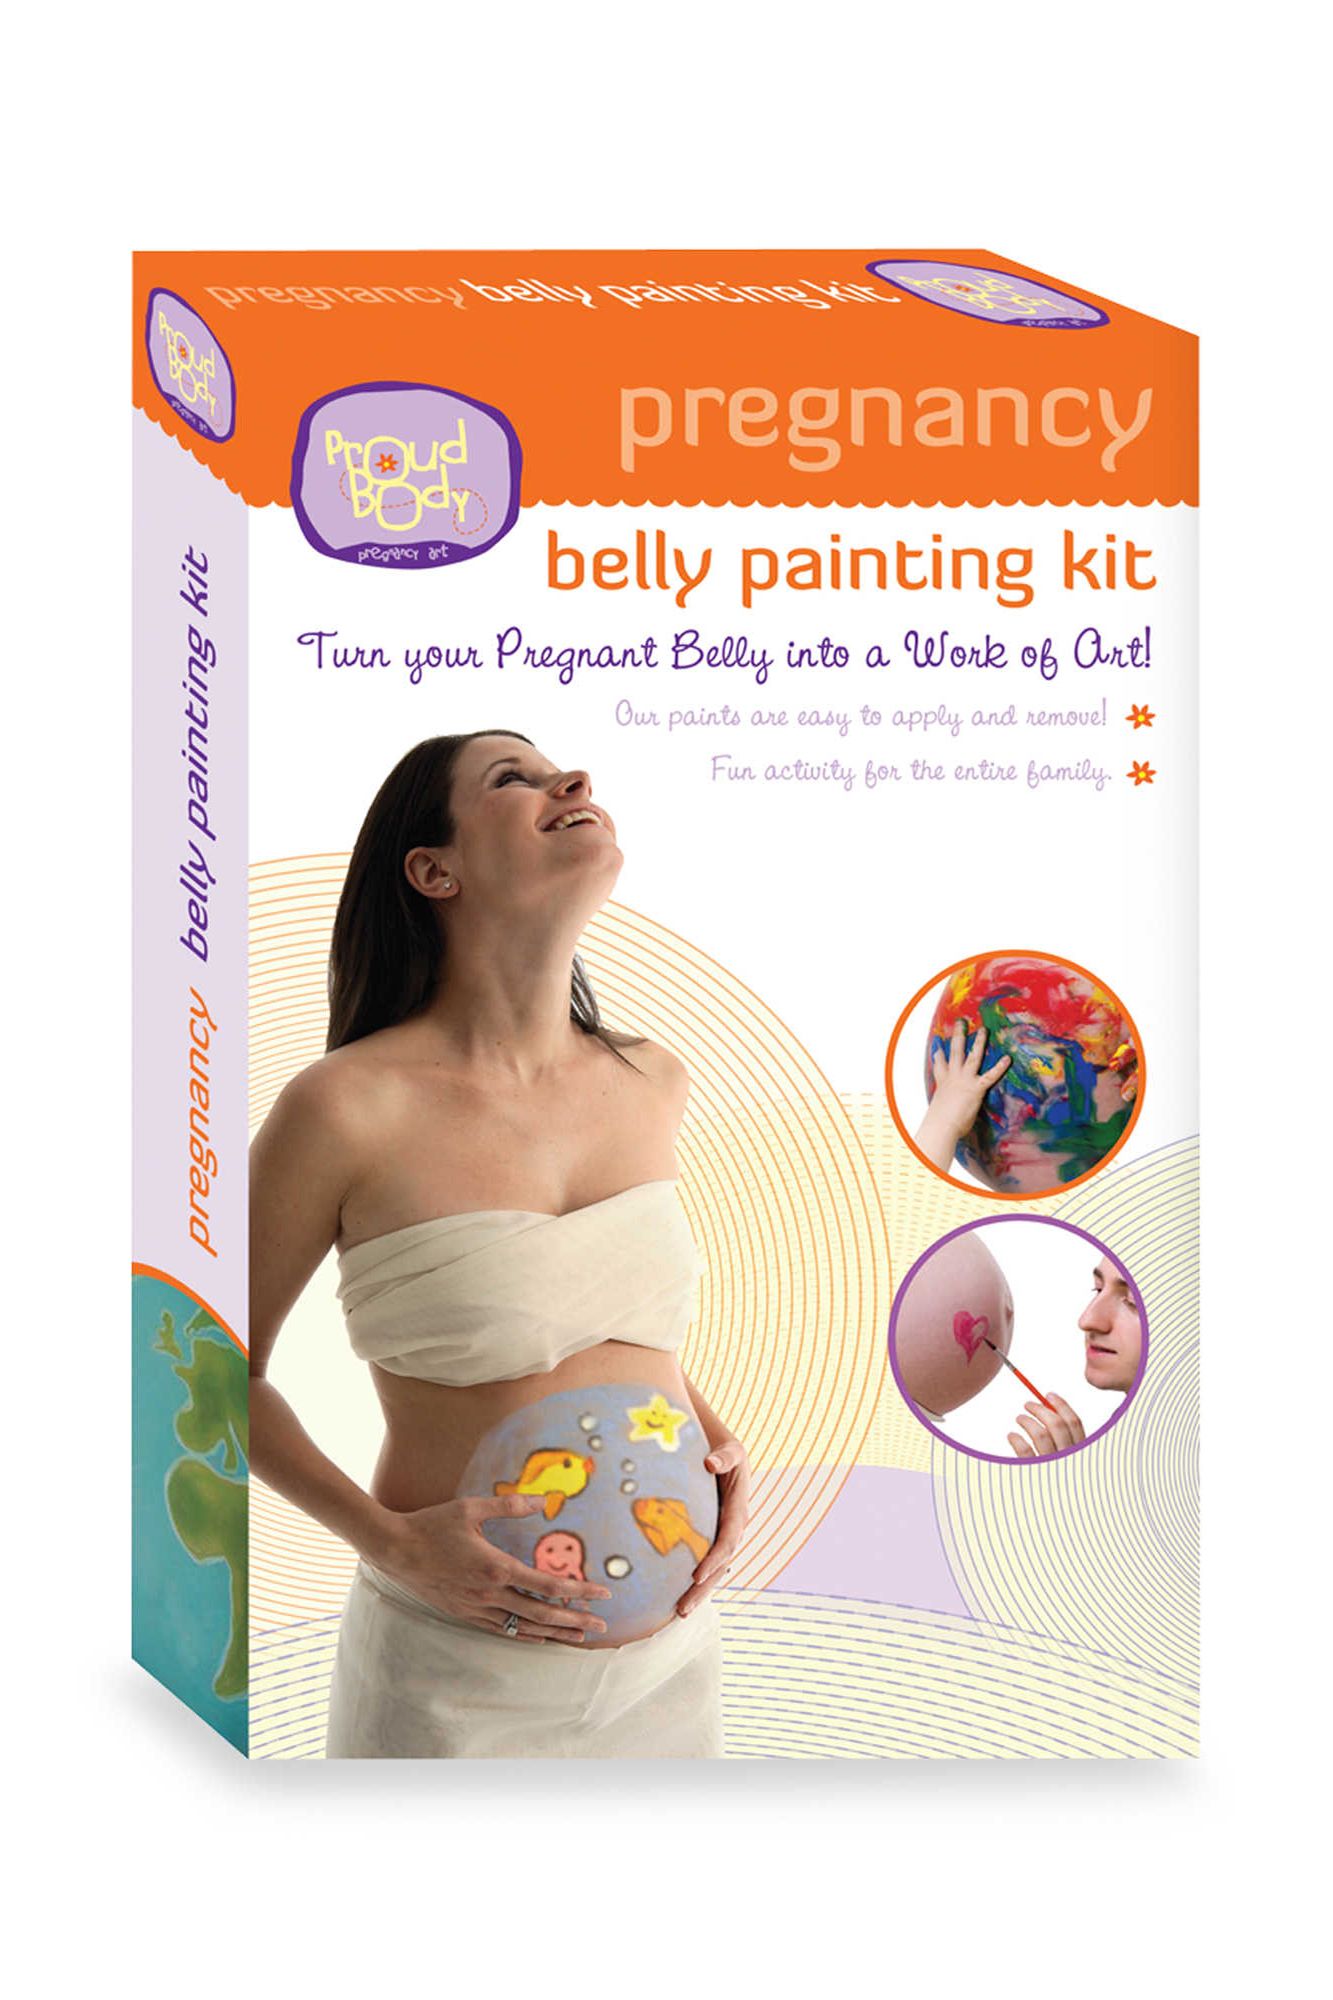 gifts for newly expecting mothers